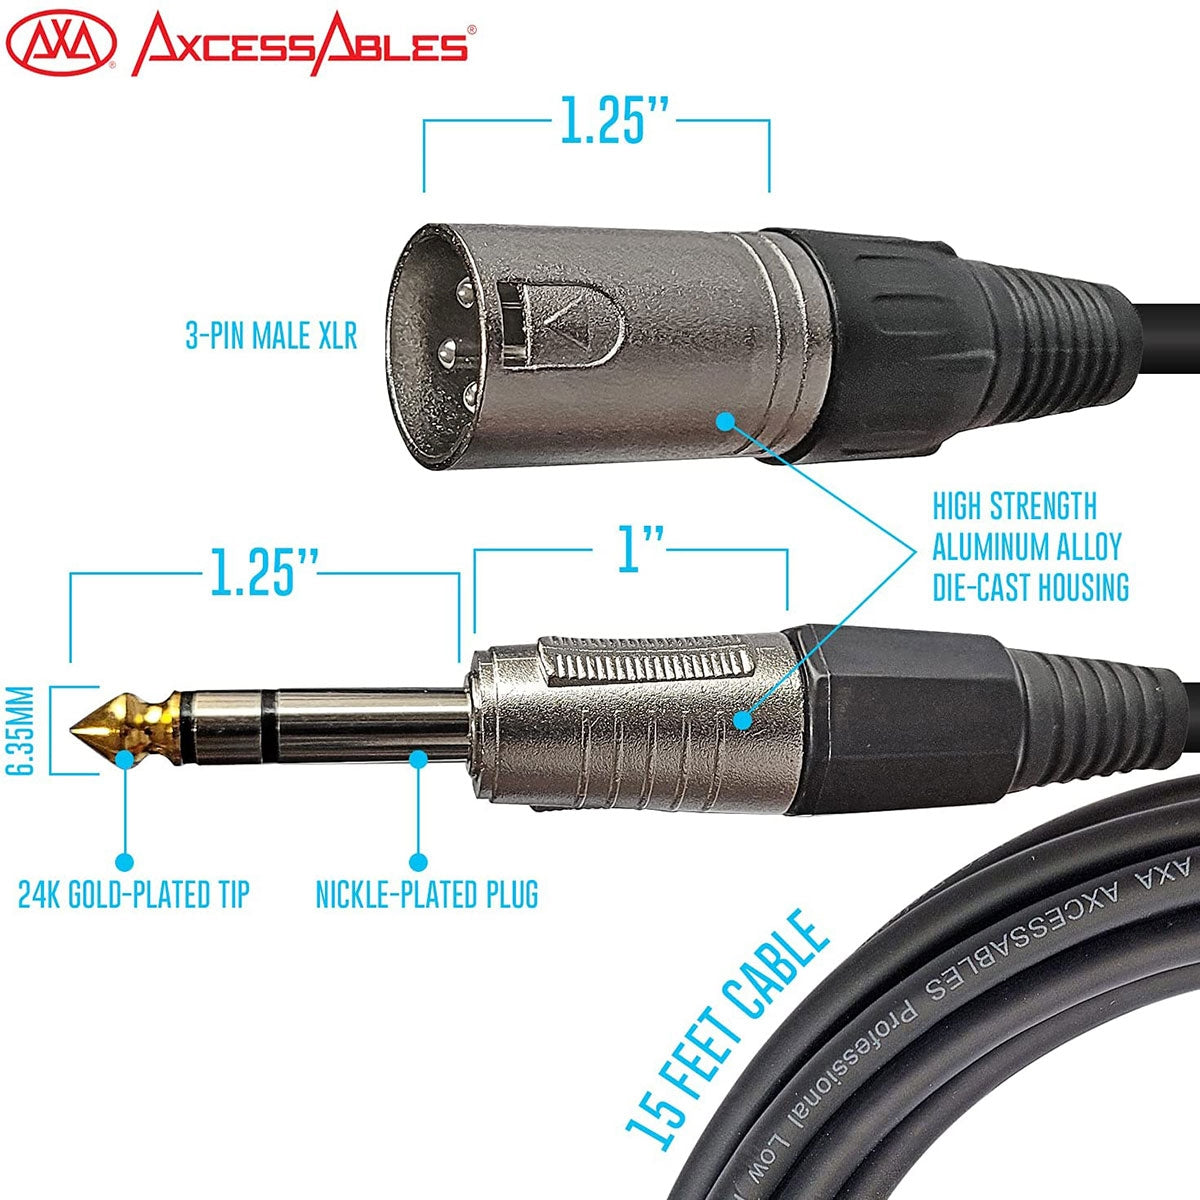 AxcessAbles 15ft Long 1/4 inch TRS to XLR Male Balanced Audio Cable | US Based Co. | Quarter Inch Stereo to XLR Male Audio| 6.35mm TRS to XLR Cable 15ft Cable for Mixers, Studio Speakers, Interfaces (4-Pack)